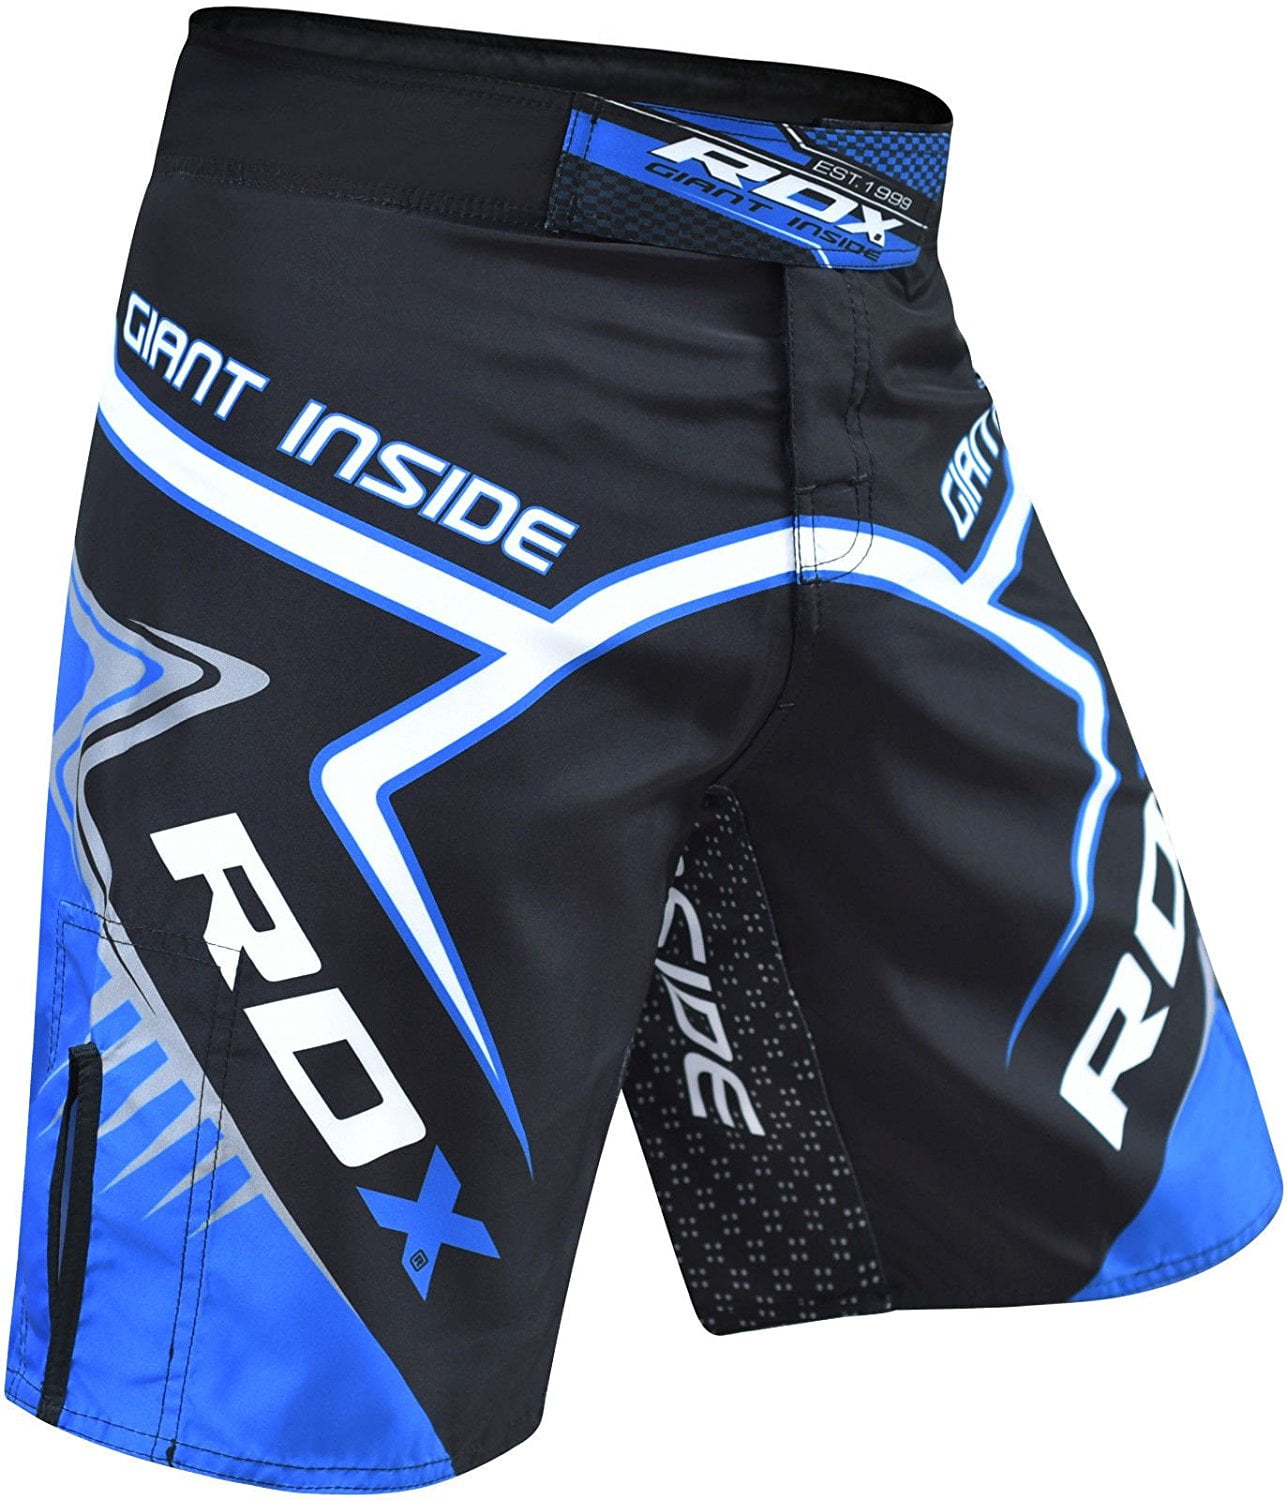 RDX MMA Stretch Shorts Clothing Training Cage Fighting Grappling Martial Arts Muay Thai Kickboxing 